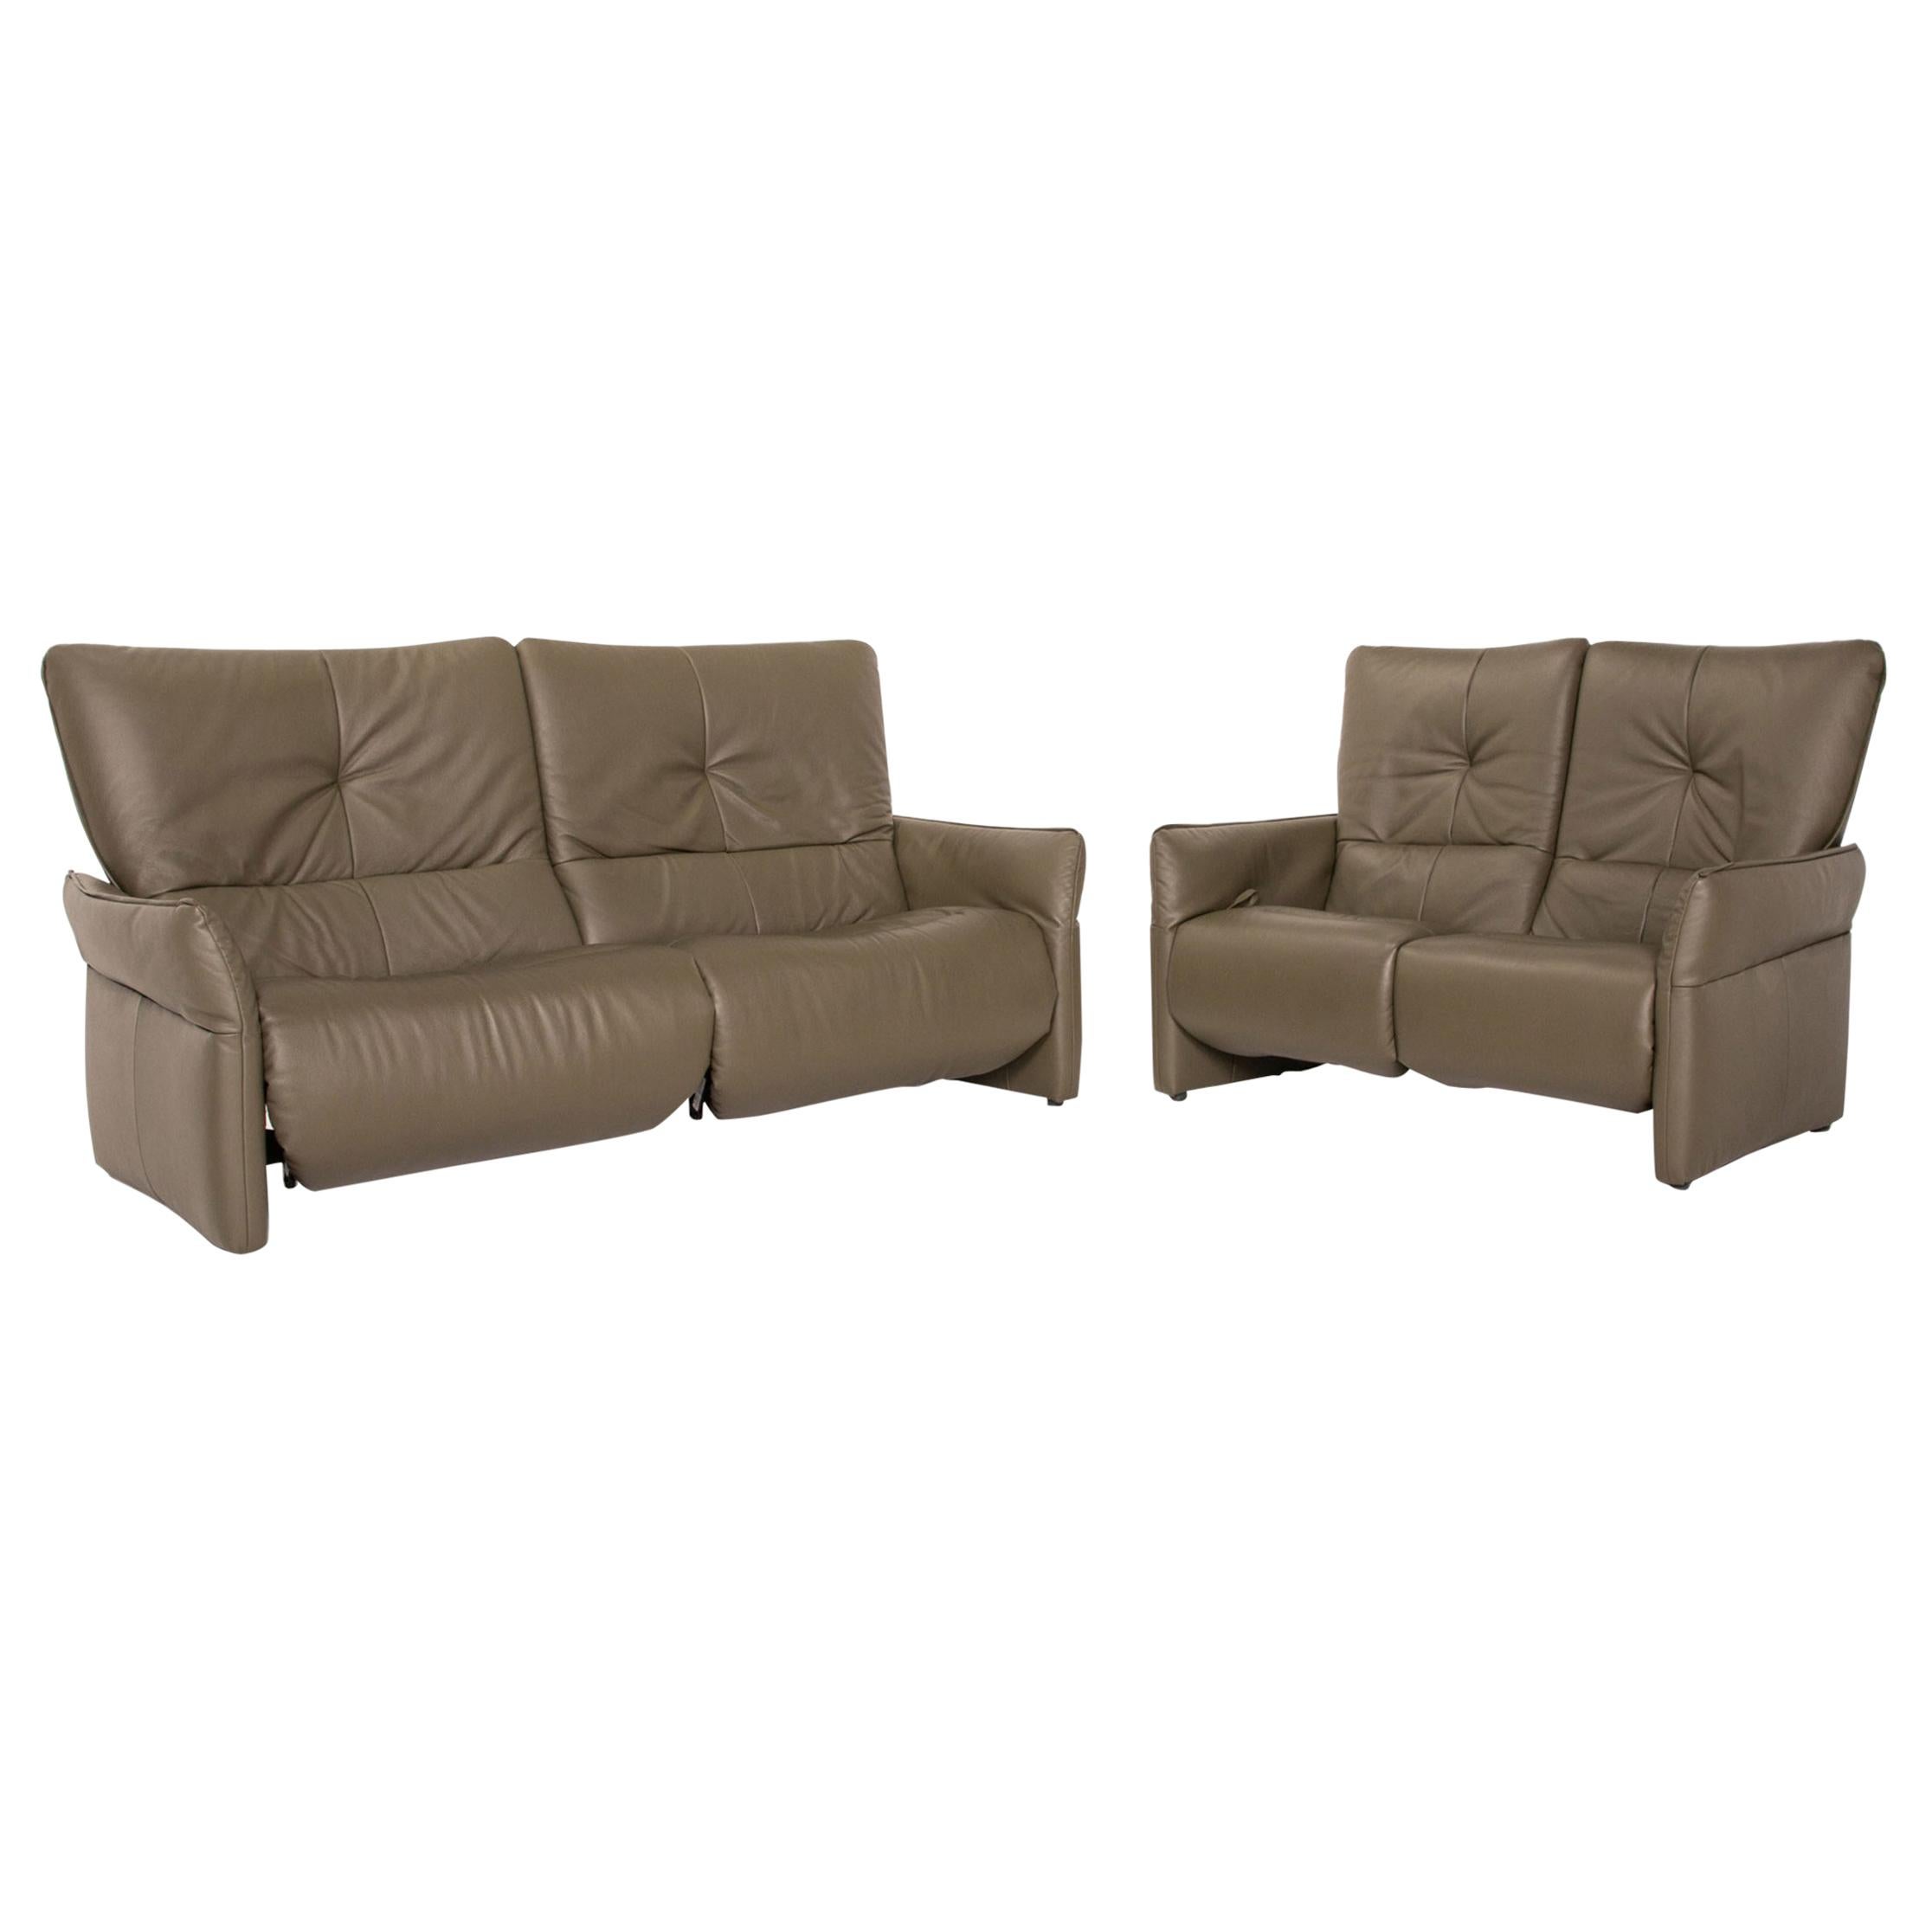 Himolla Cumuly Leather Sofa Set Olive Green 1x Three-Seater 1x Two-Seater